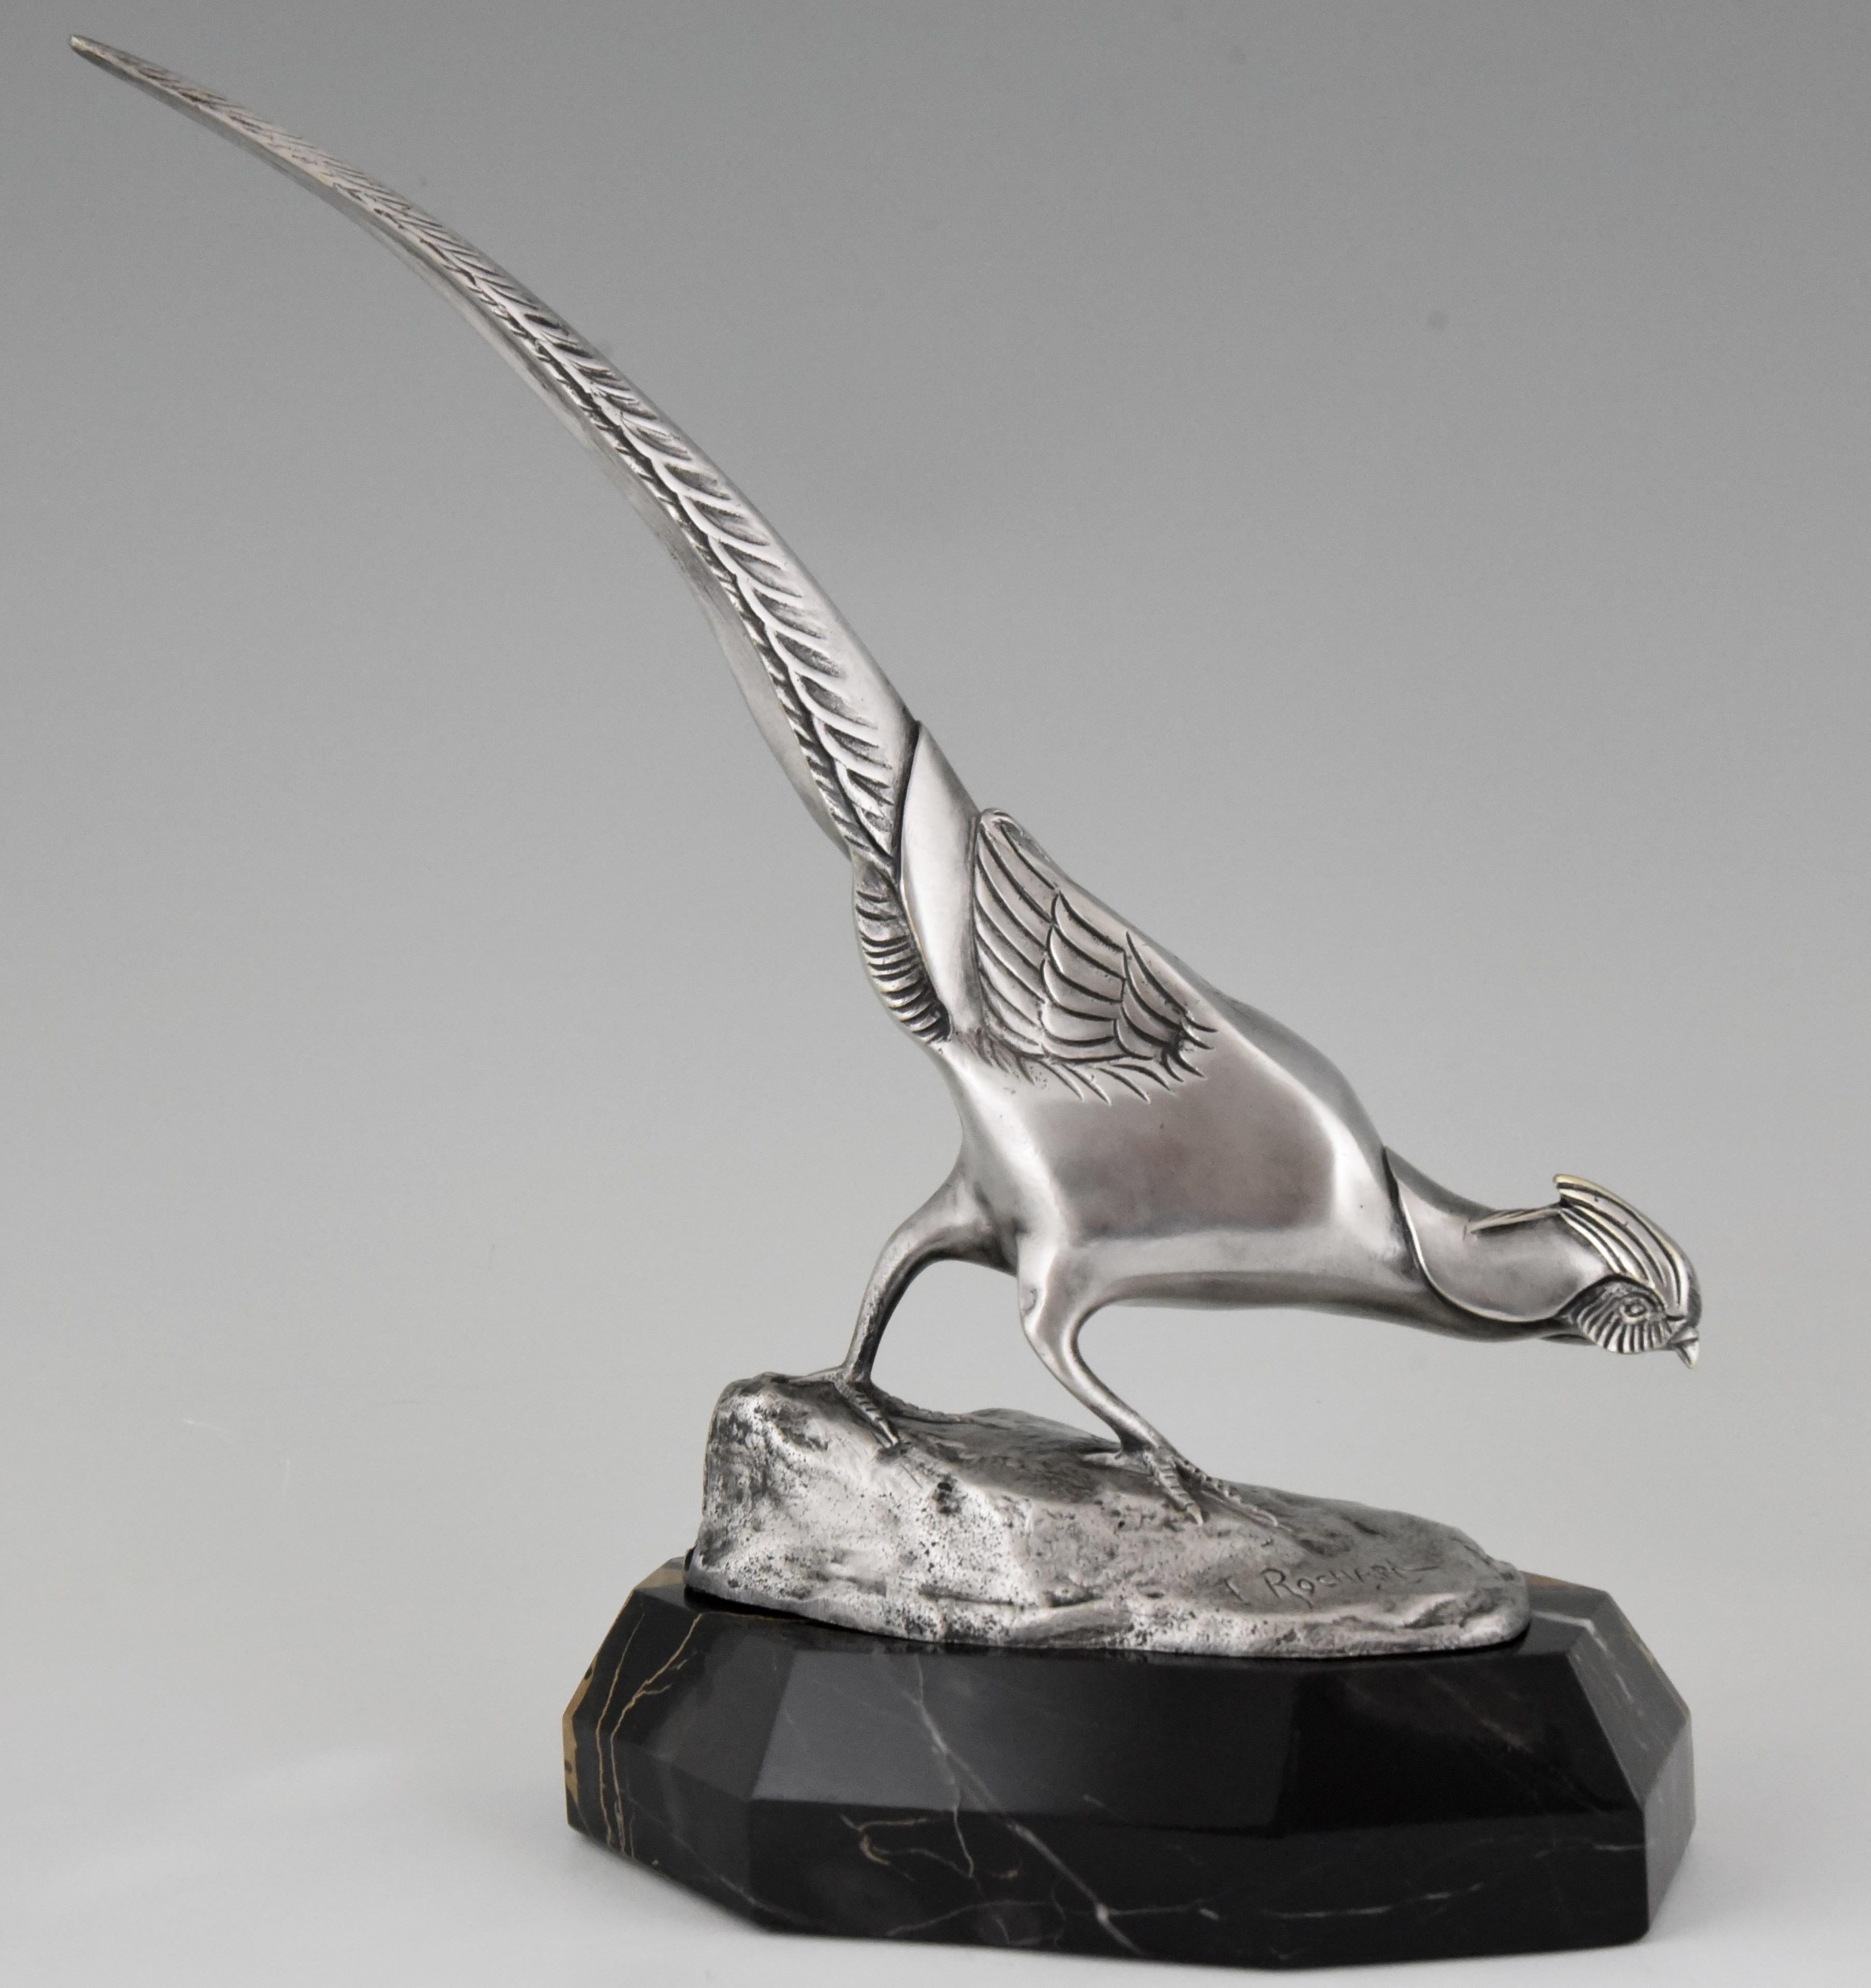 Very nice bronze Art Deco sculpture of a pheasant with lovely silver patina, mounted on a Portor marble base. Signed by Irenee Rochard, France, 1925.
“Animals in bronze” by Christopher Payne. Antique collectors club. “Dictionnaire des peintres,